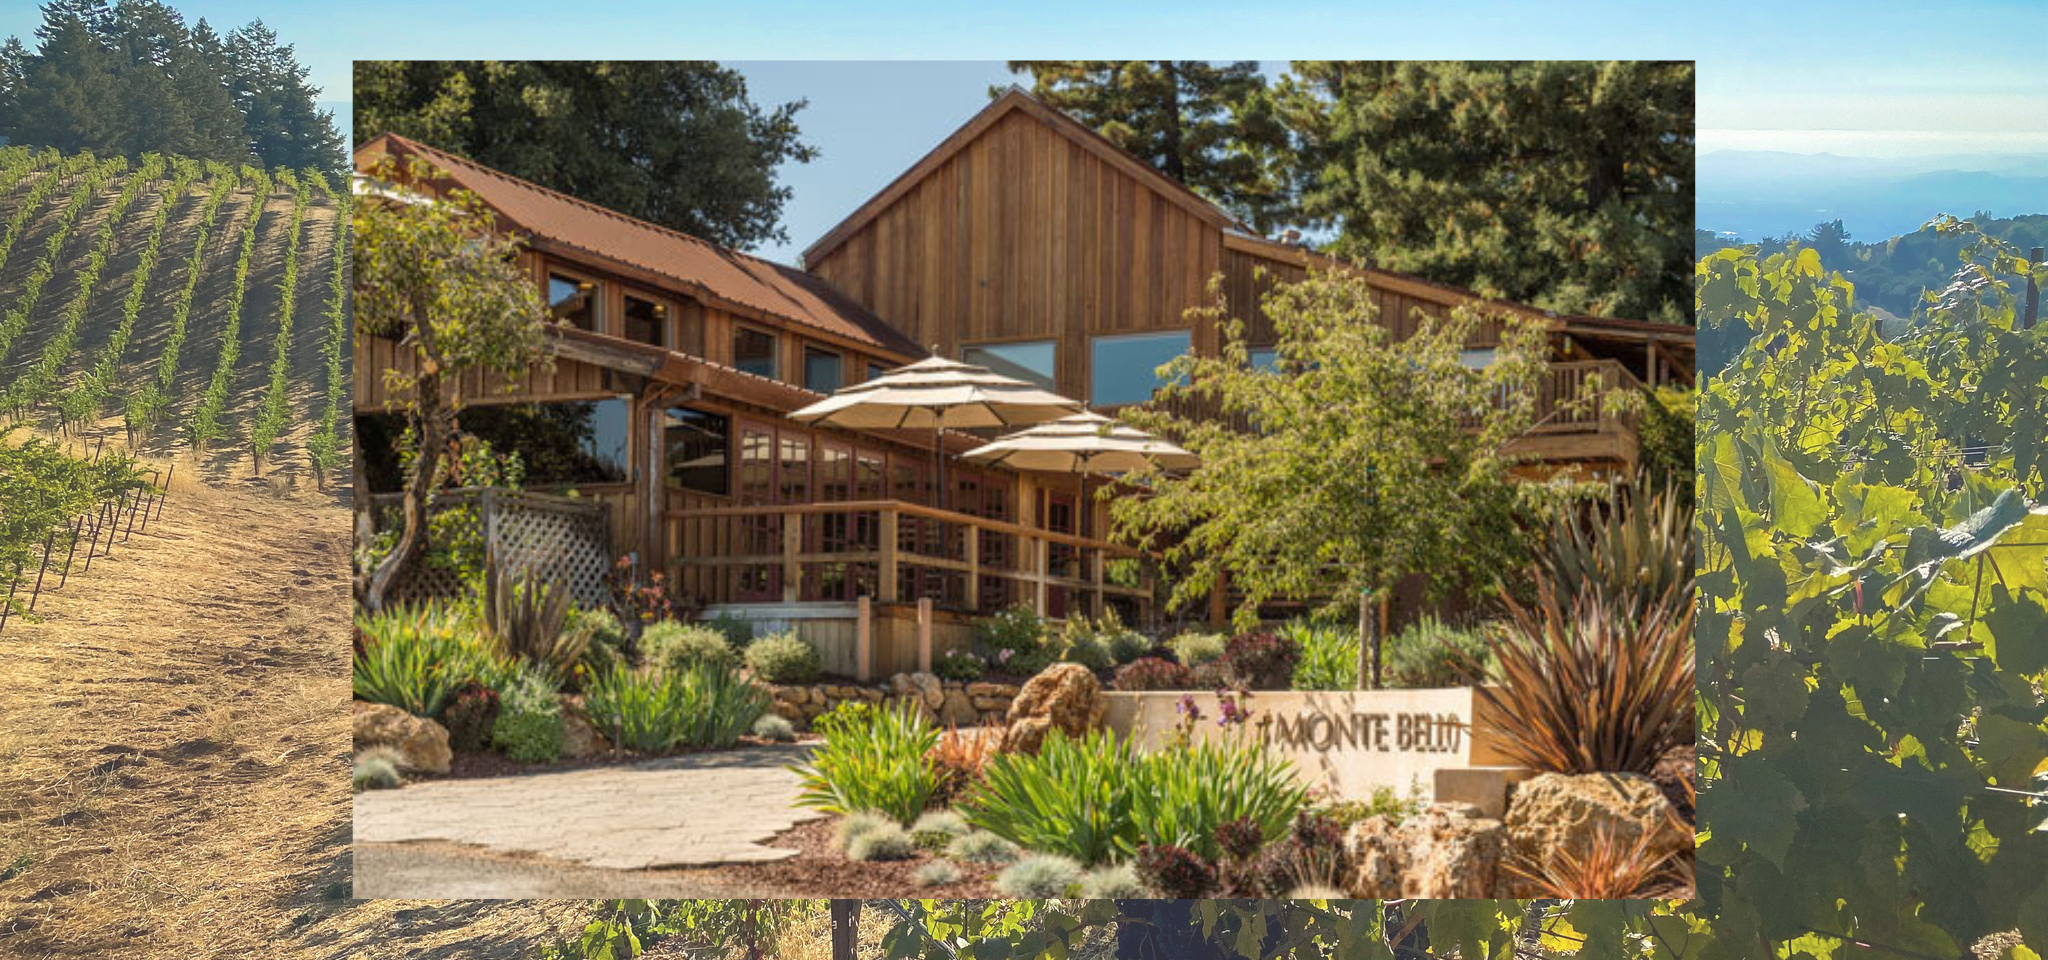 the exterior of the wooden Ridge Monte Bello tasting room with a couple of outdoor umbrellas, shrubs and trees